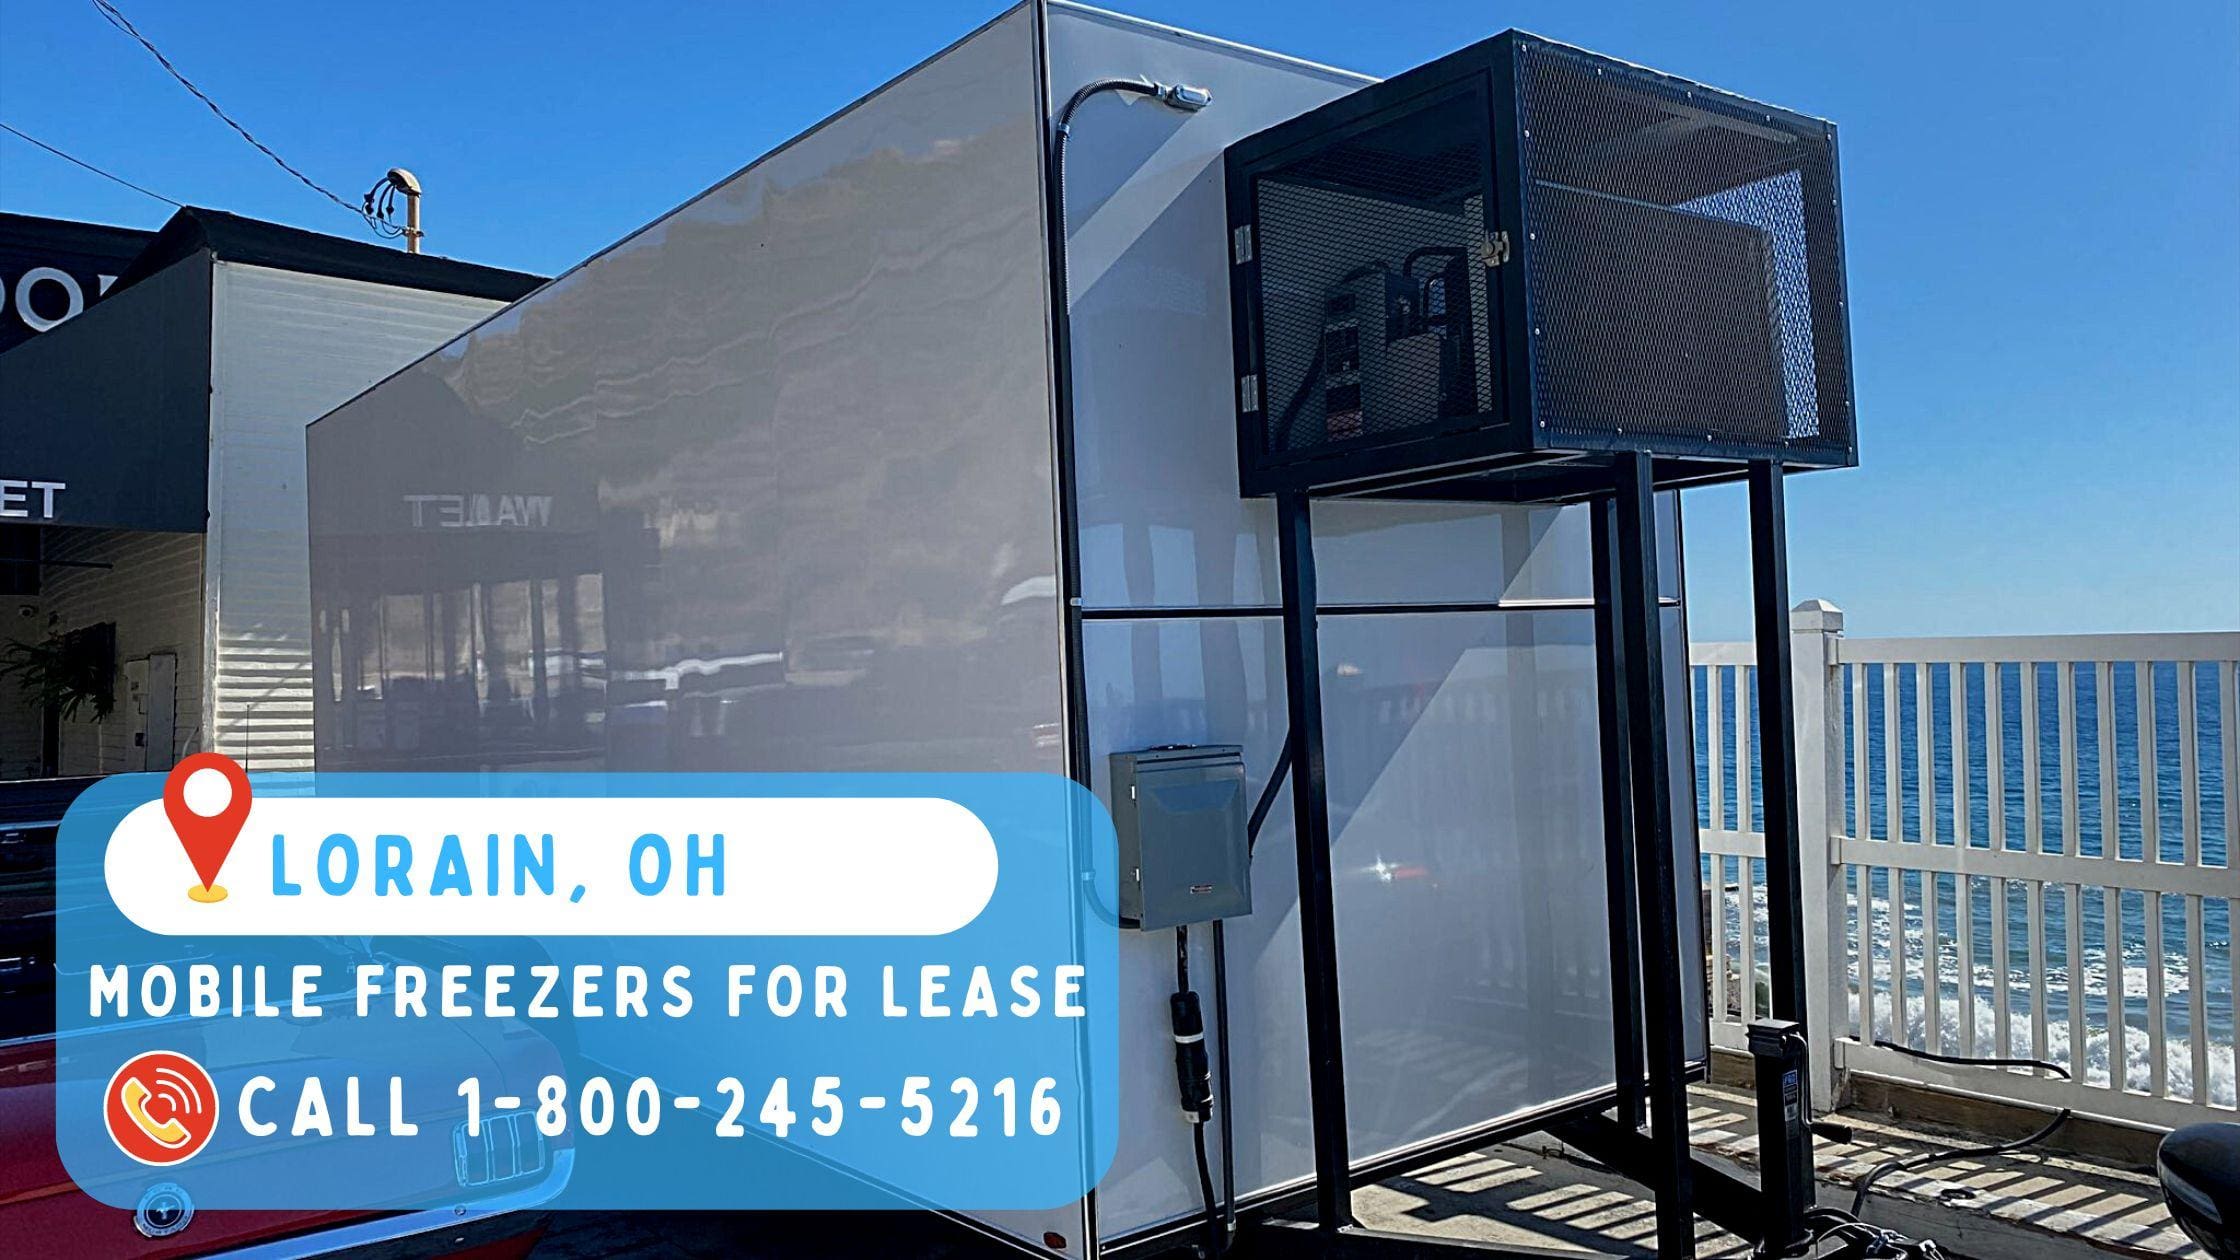 Mobile Freezers for Lease in Lorain, OH